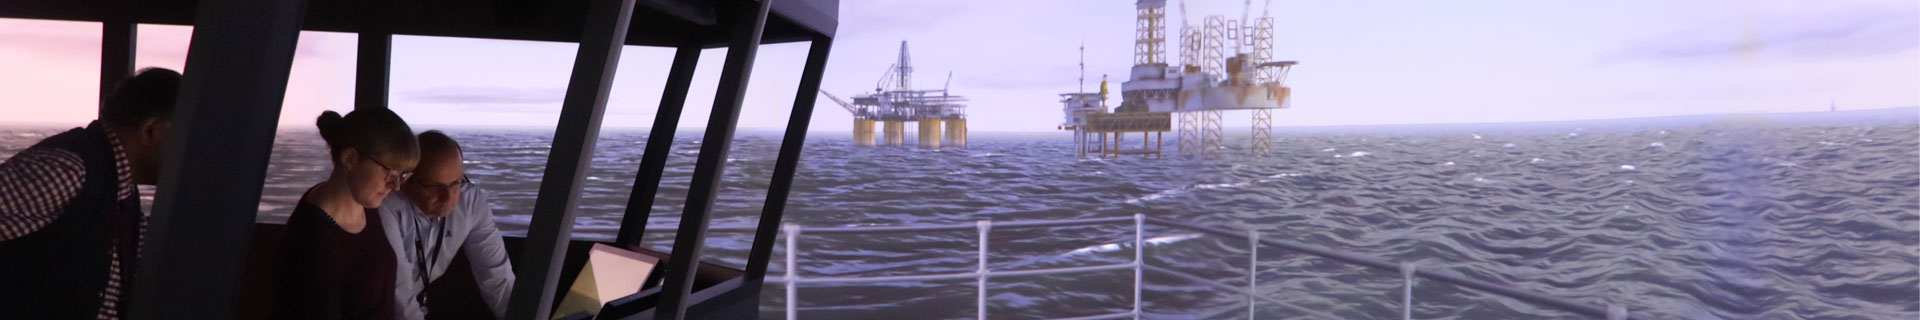 People using the DP simulator with images of oil rigs in the background